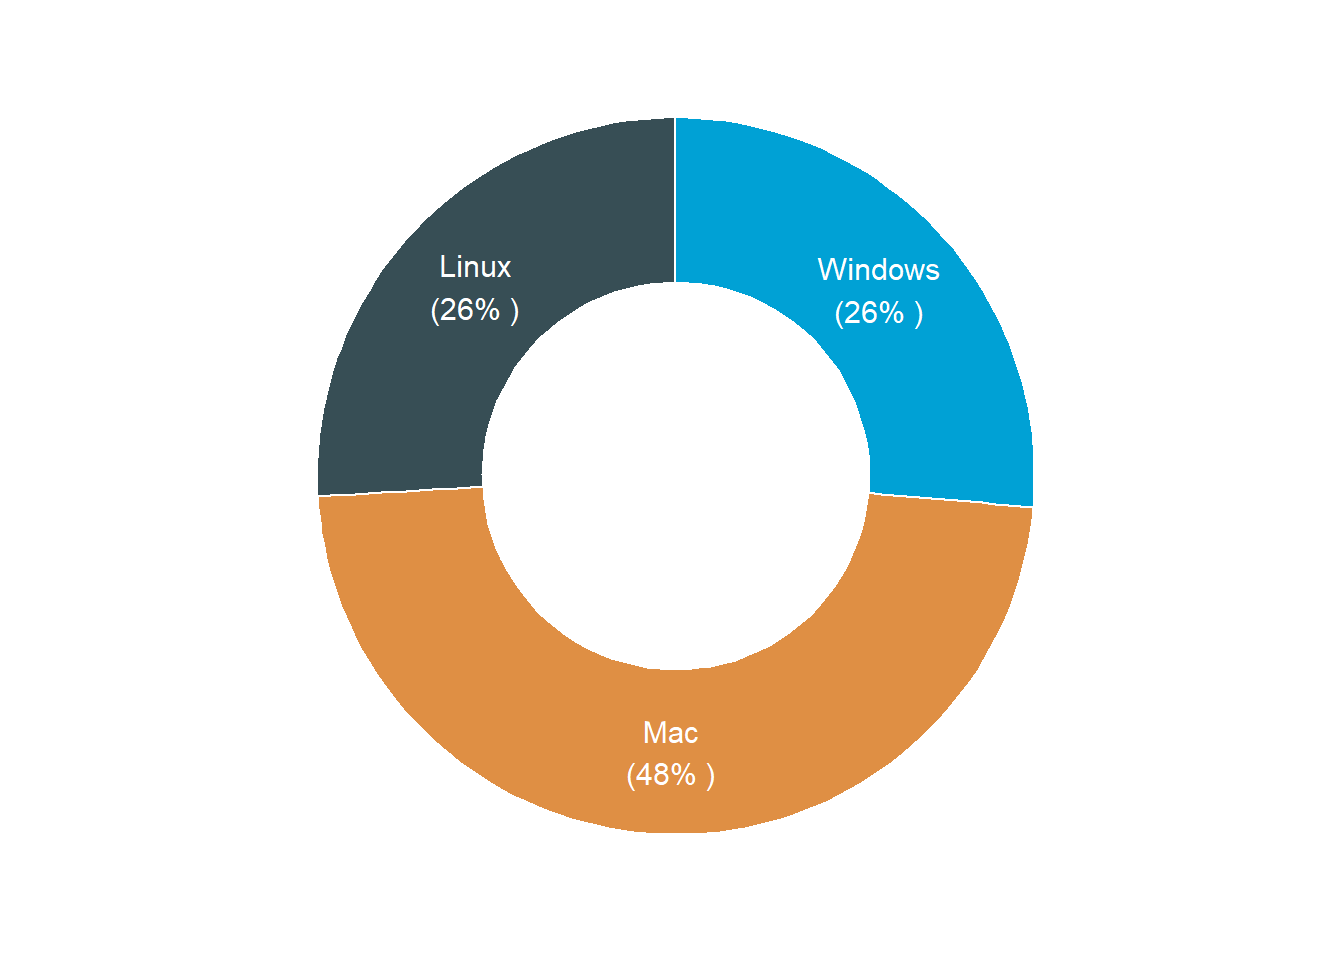 Pie chart from **ggpubr** package